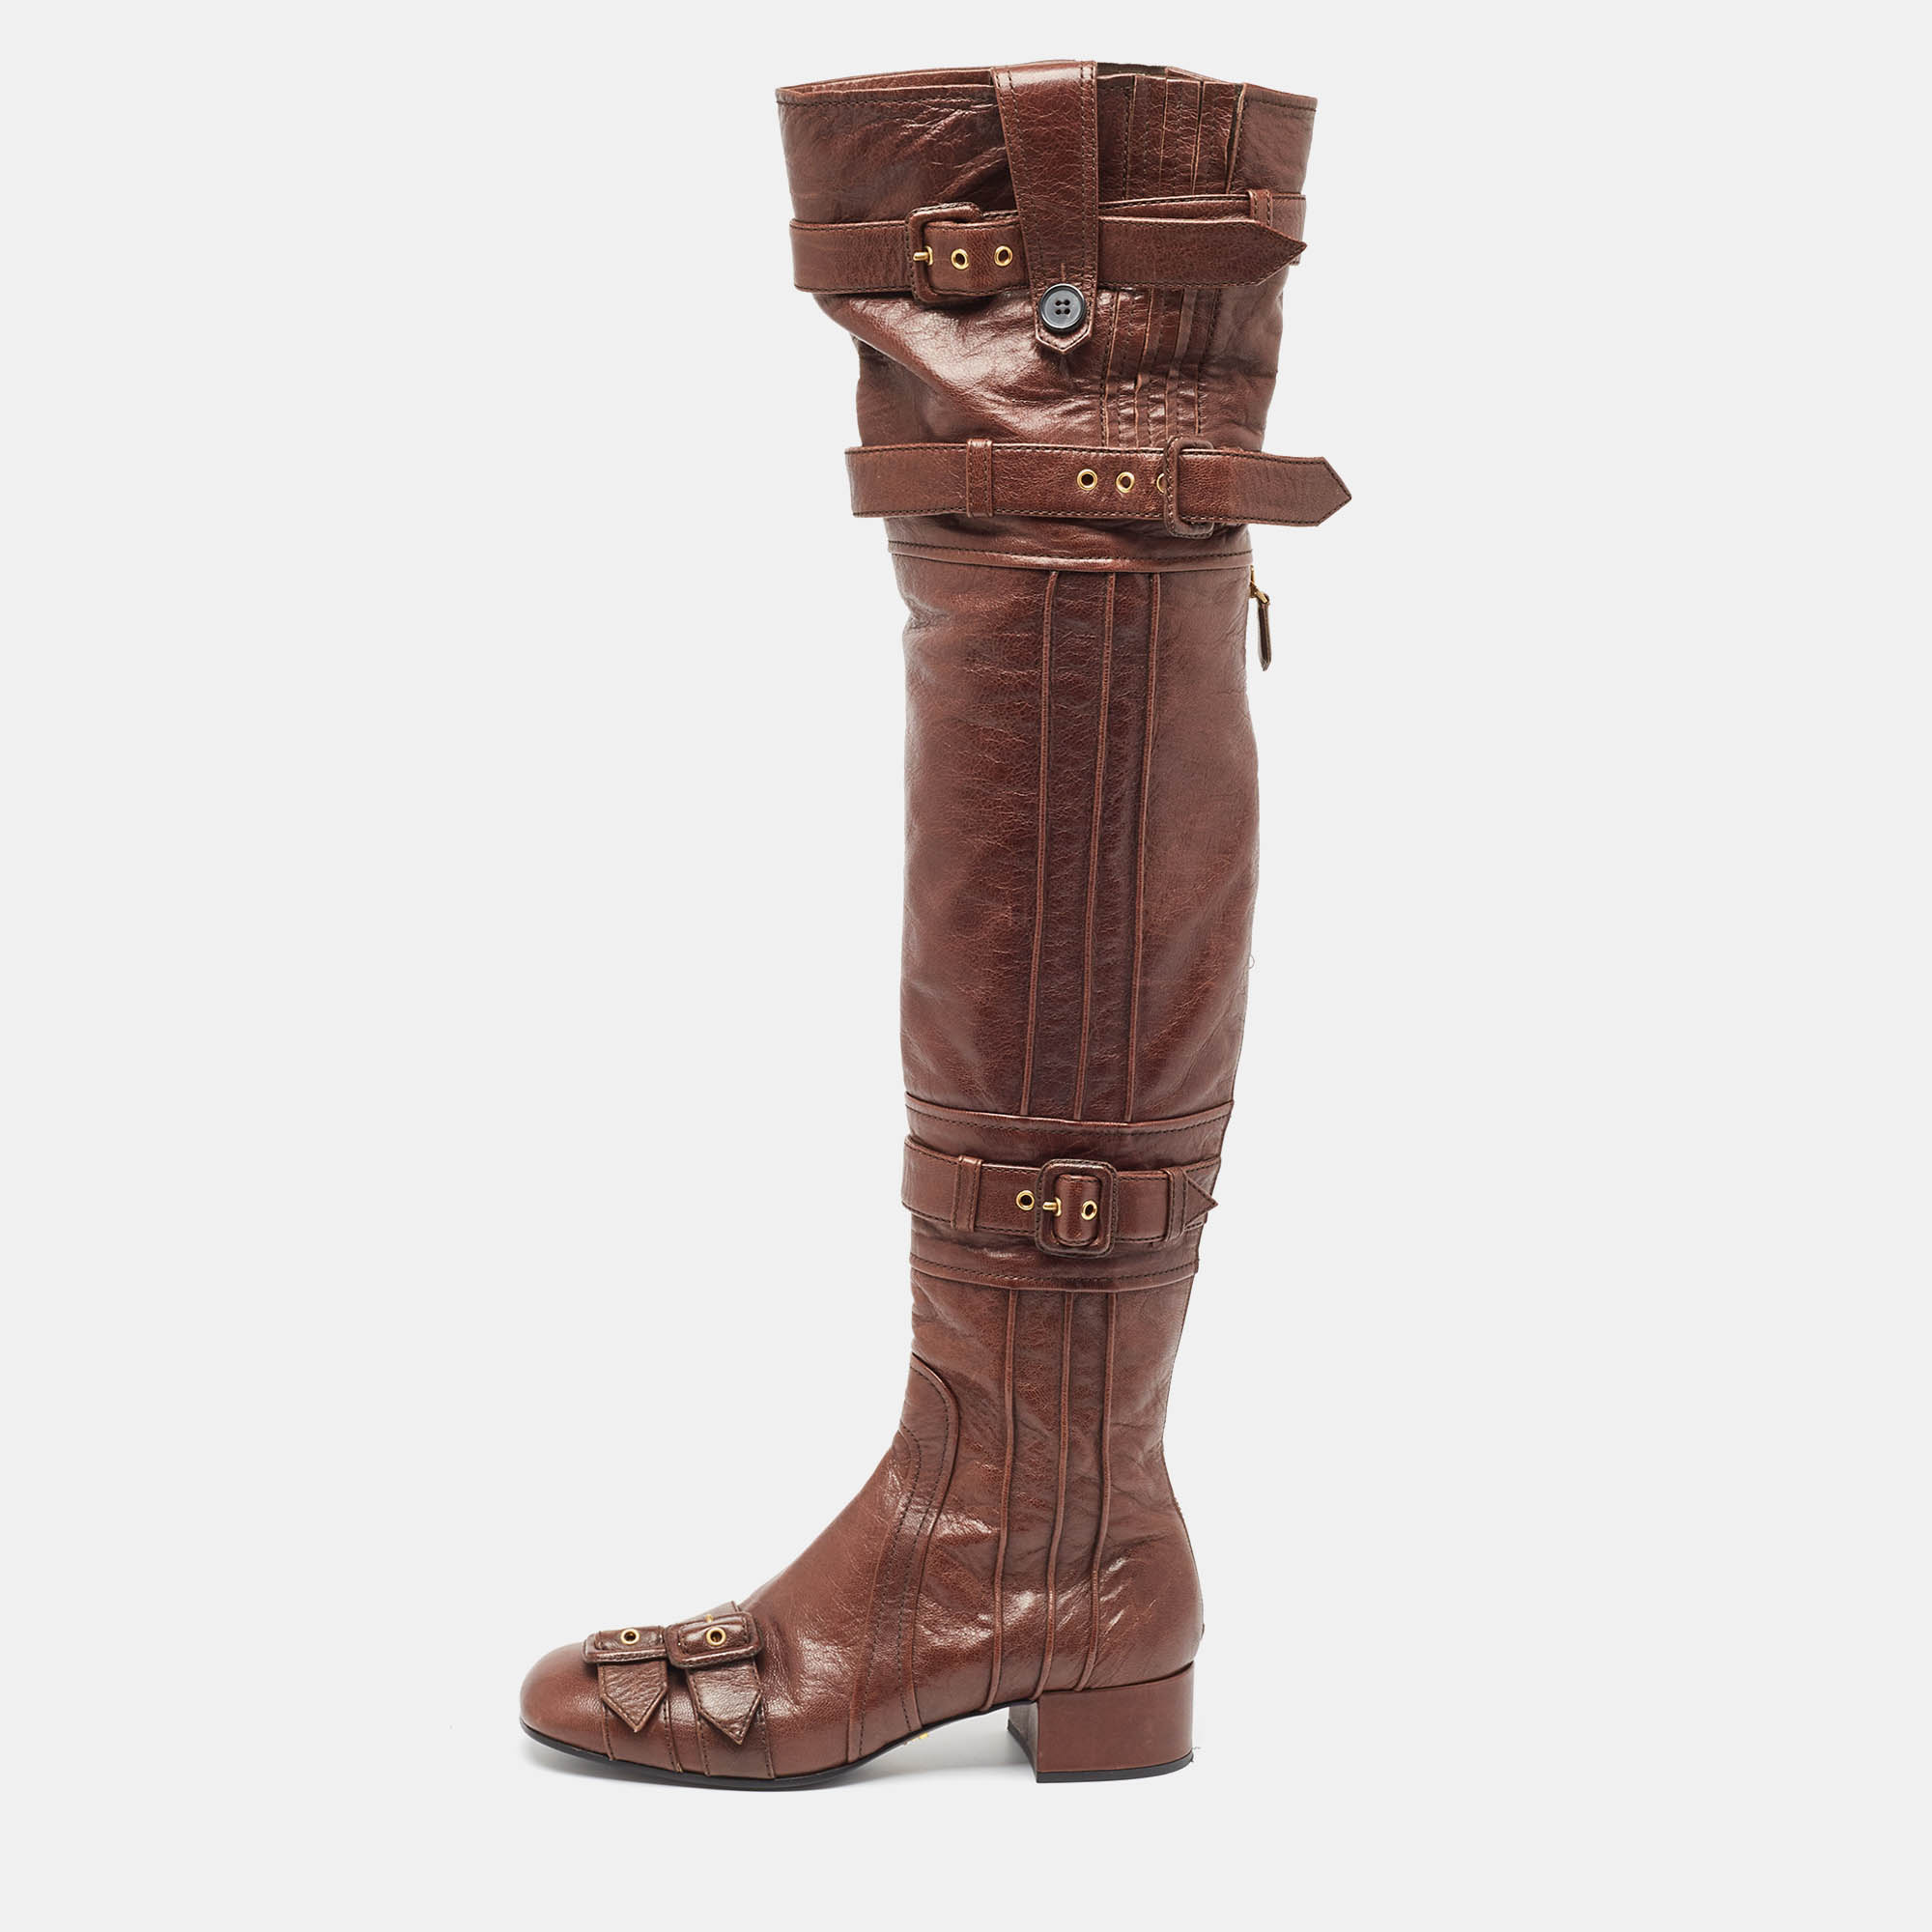 Prada brown leather buckle over the knee boots size 39